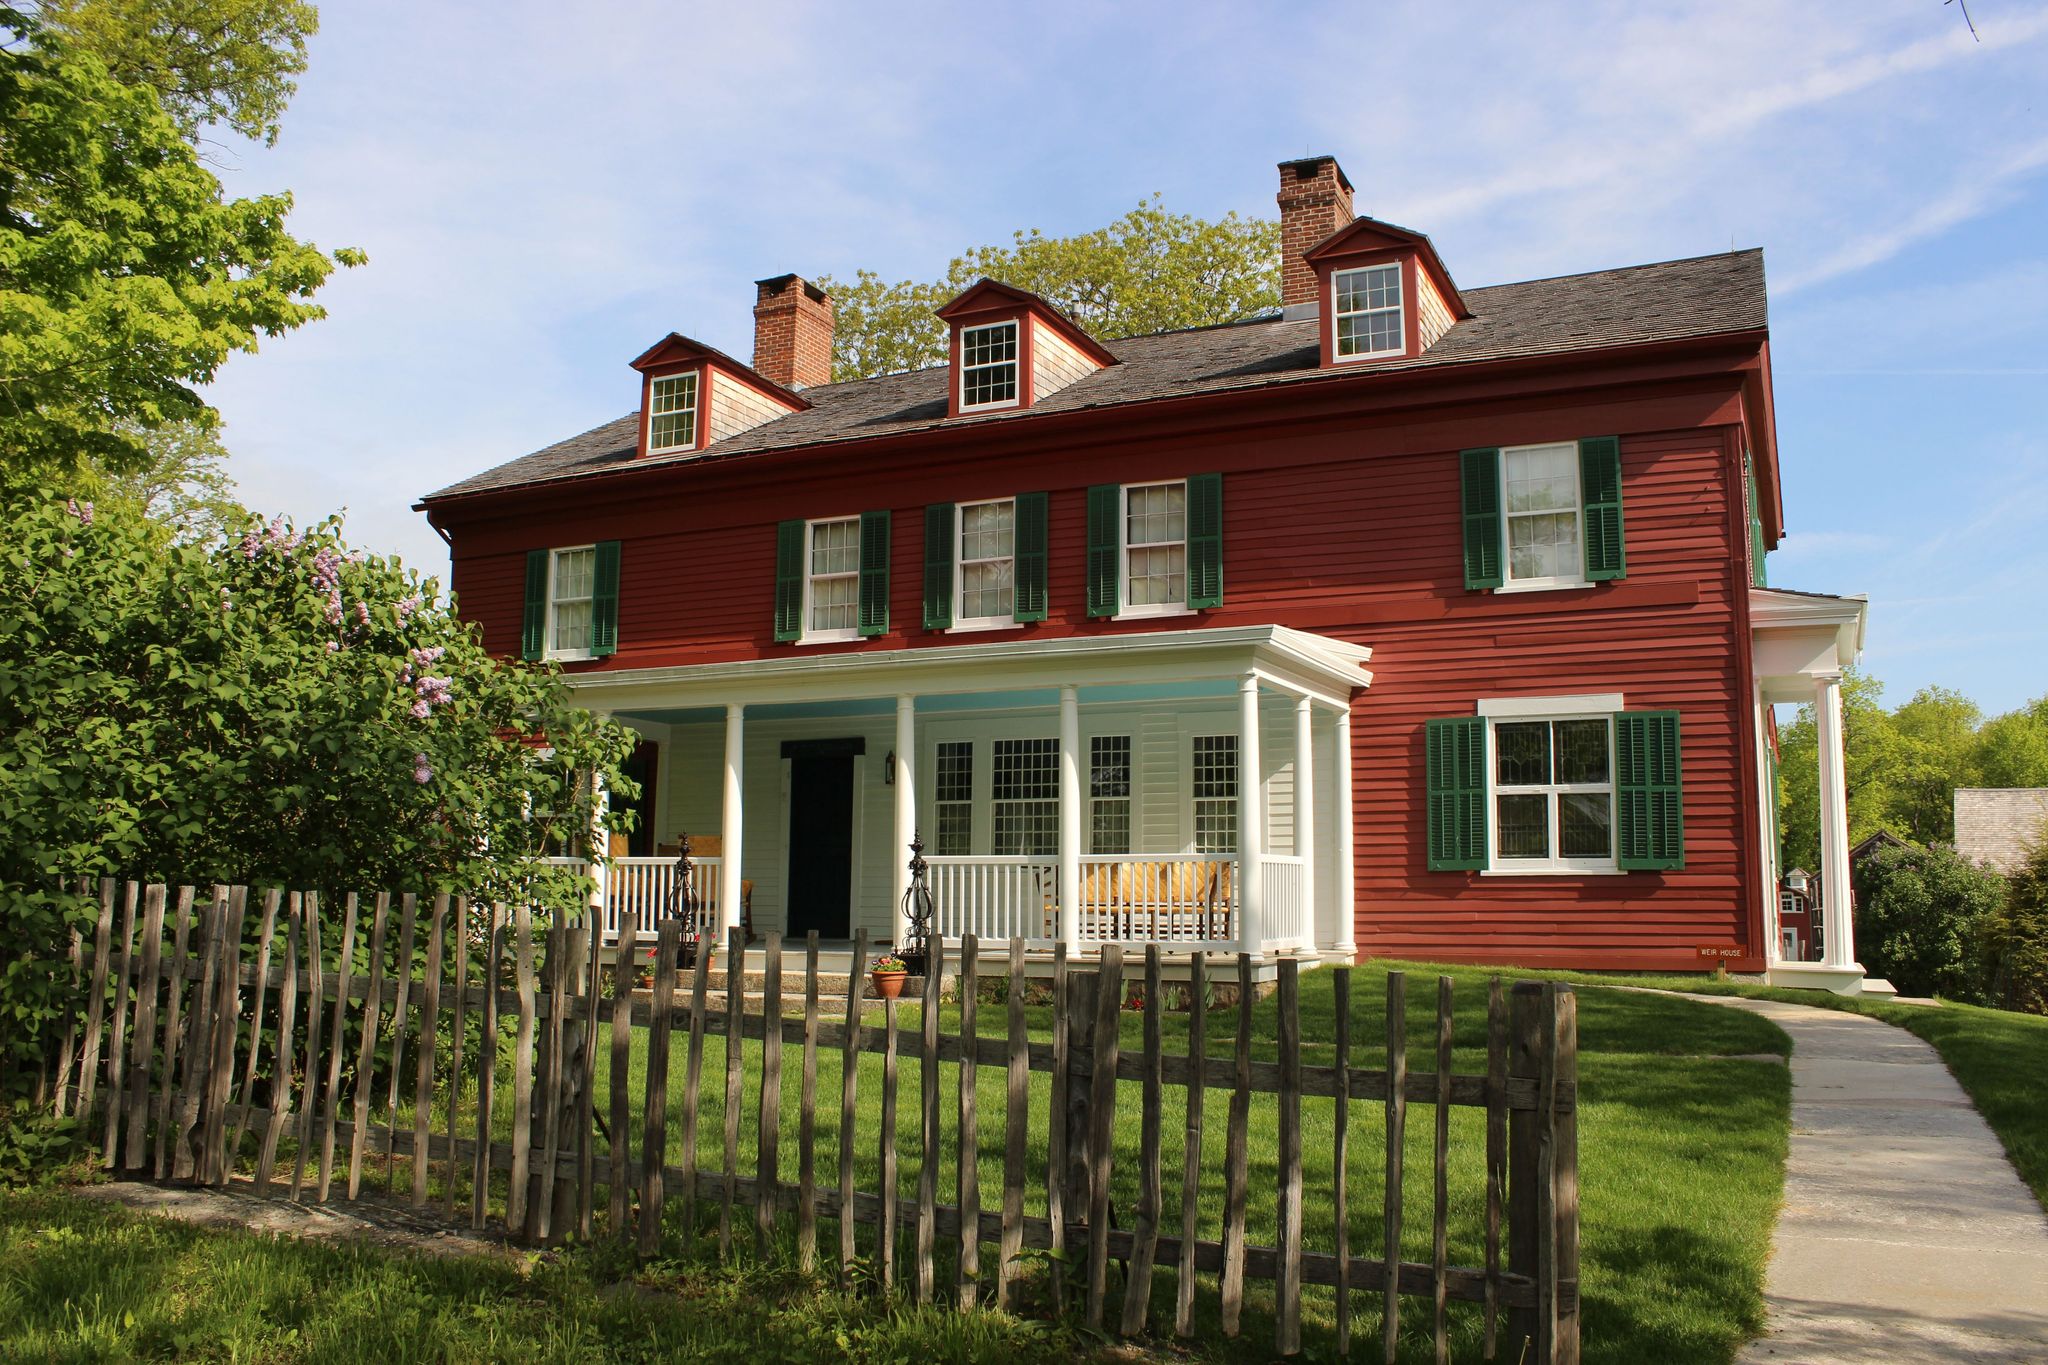 The Weir House was home to three generations of artists, beginning with Impressionist painter Julian Alden Weir in 1882.